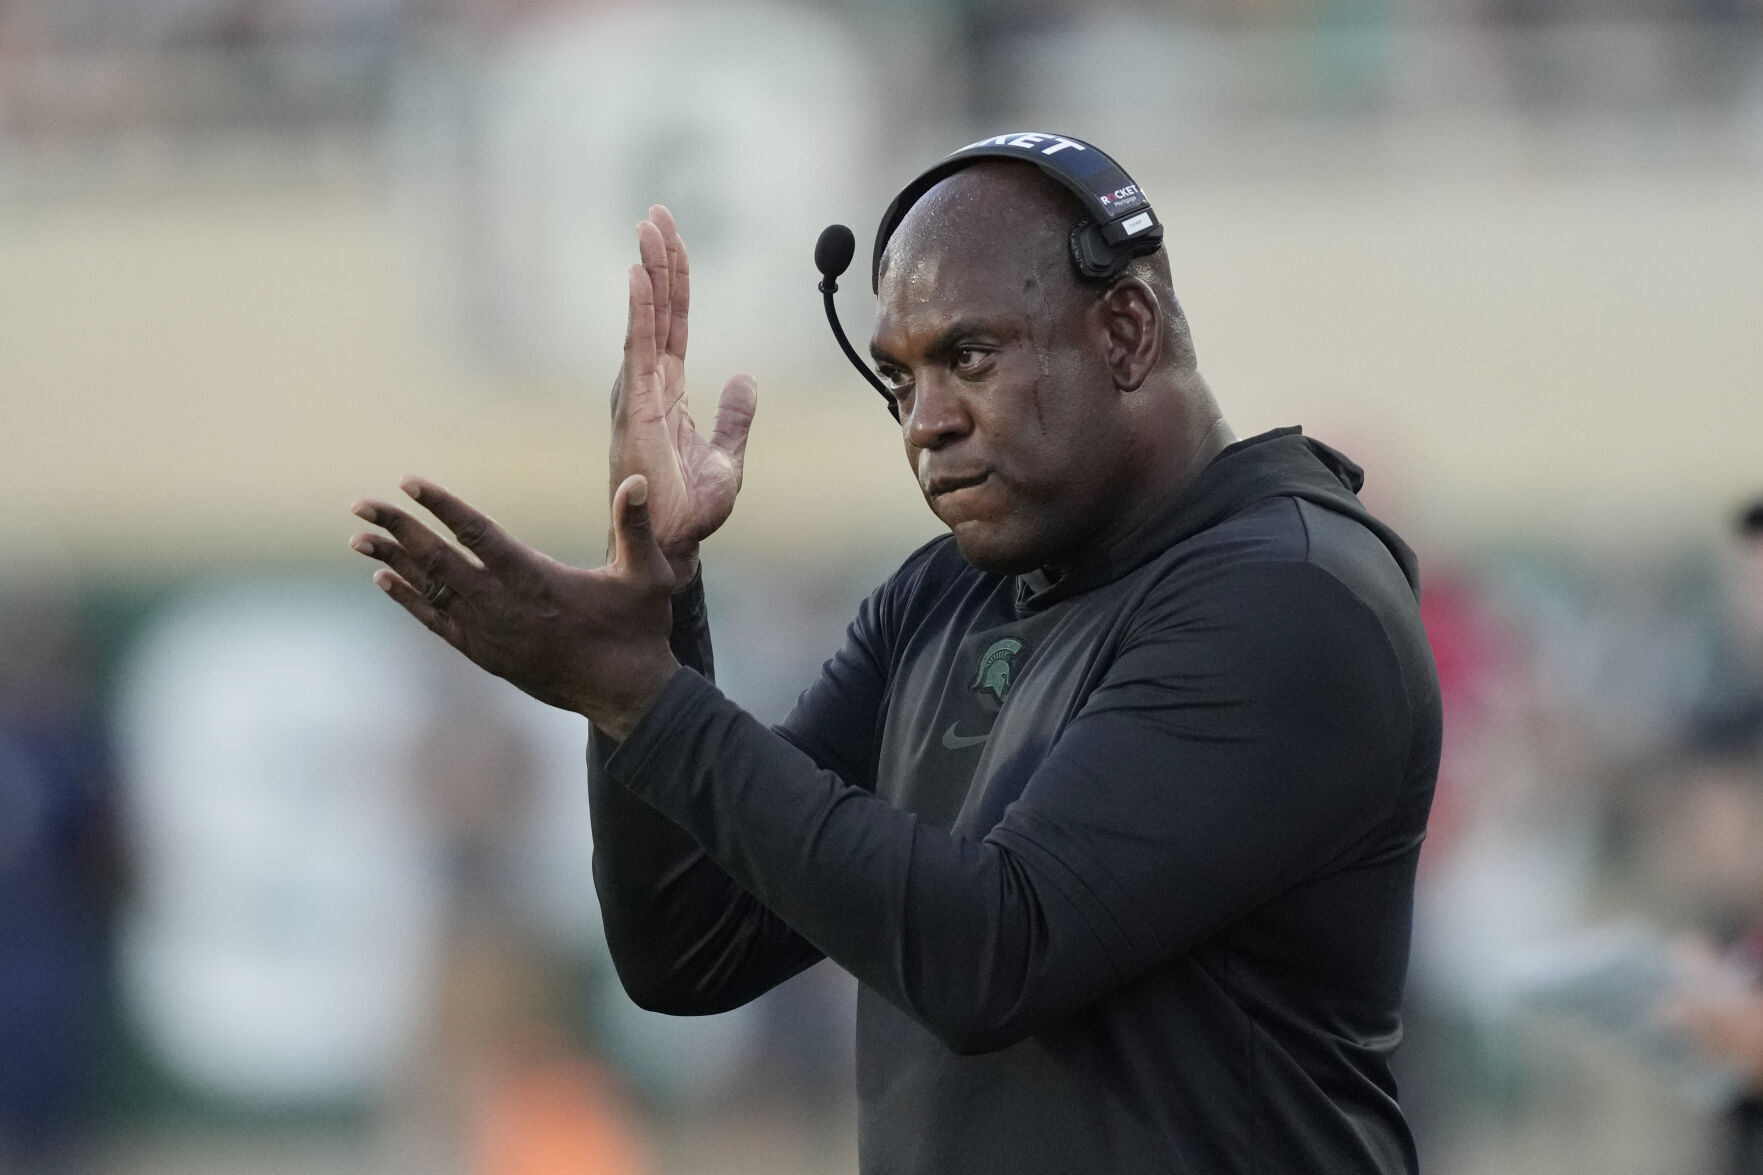 Michigan State tells football coach Mel Tucker it will fire him for misconduct with rape survivor picture image